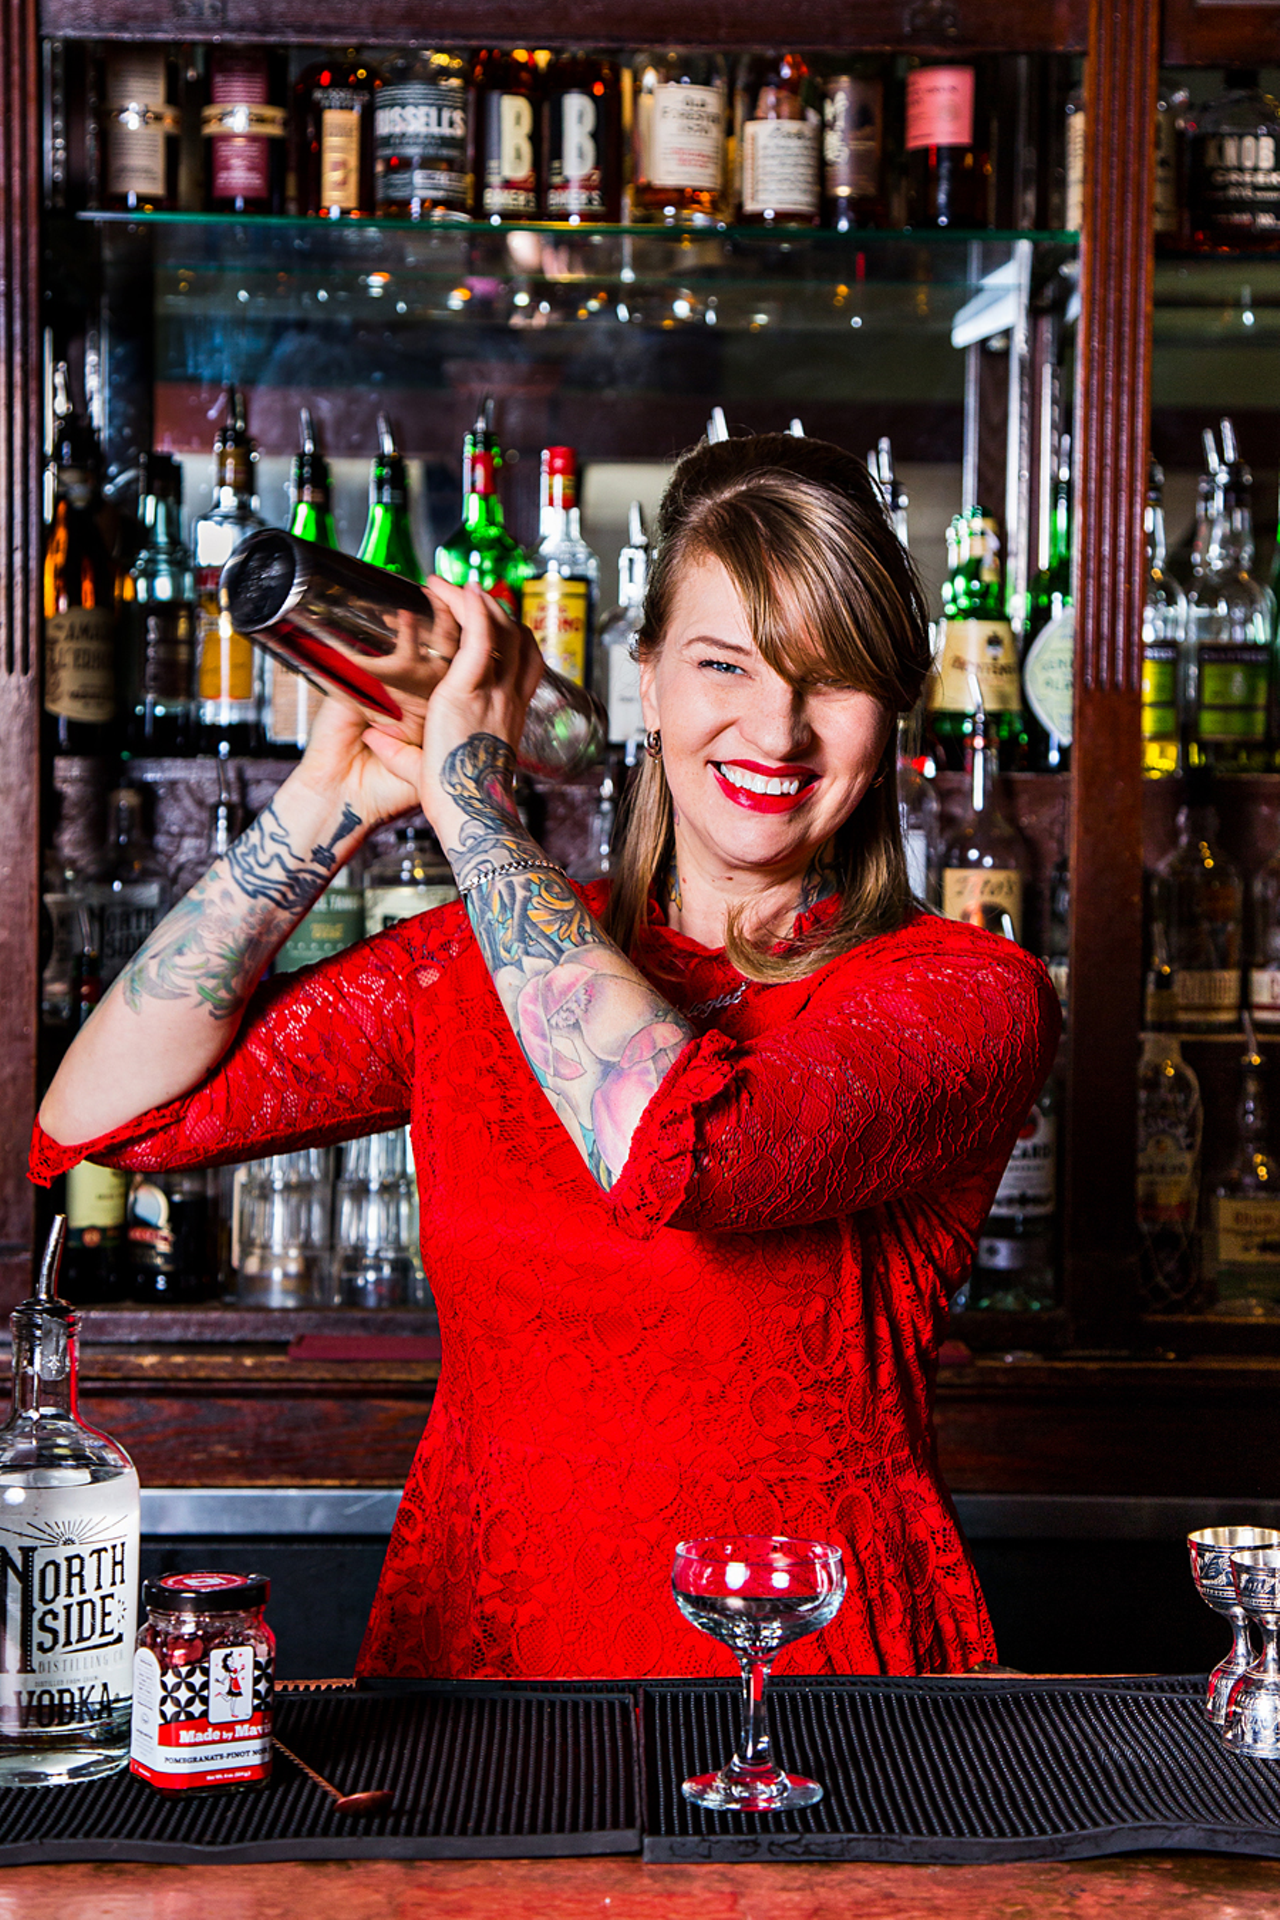 Molly Wellmann, author, mixologist and co-owner of Wellmann's Brands